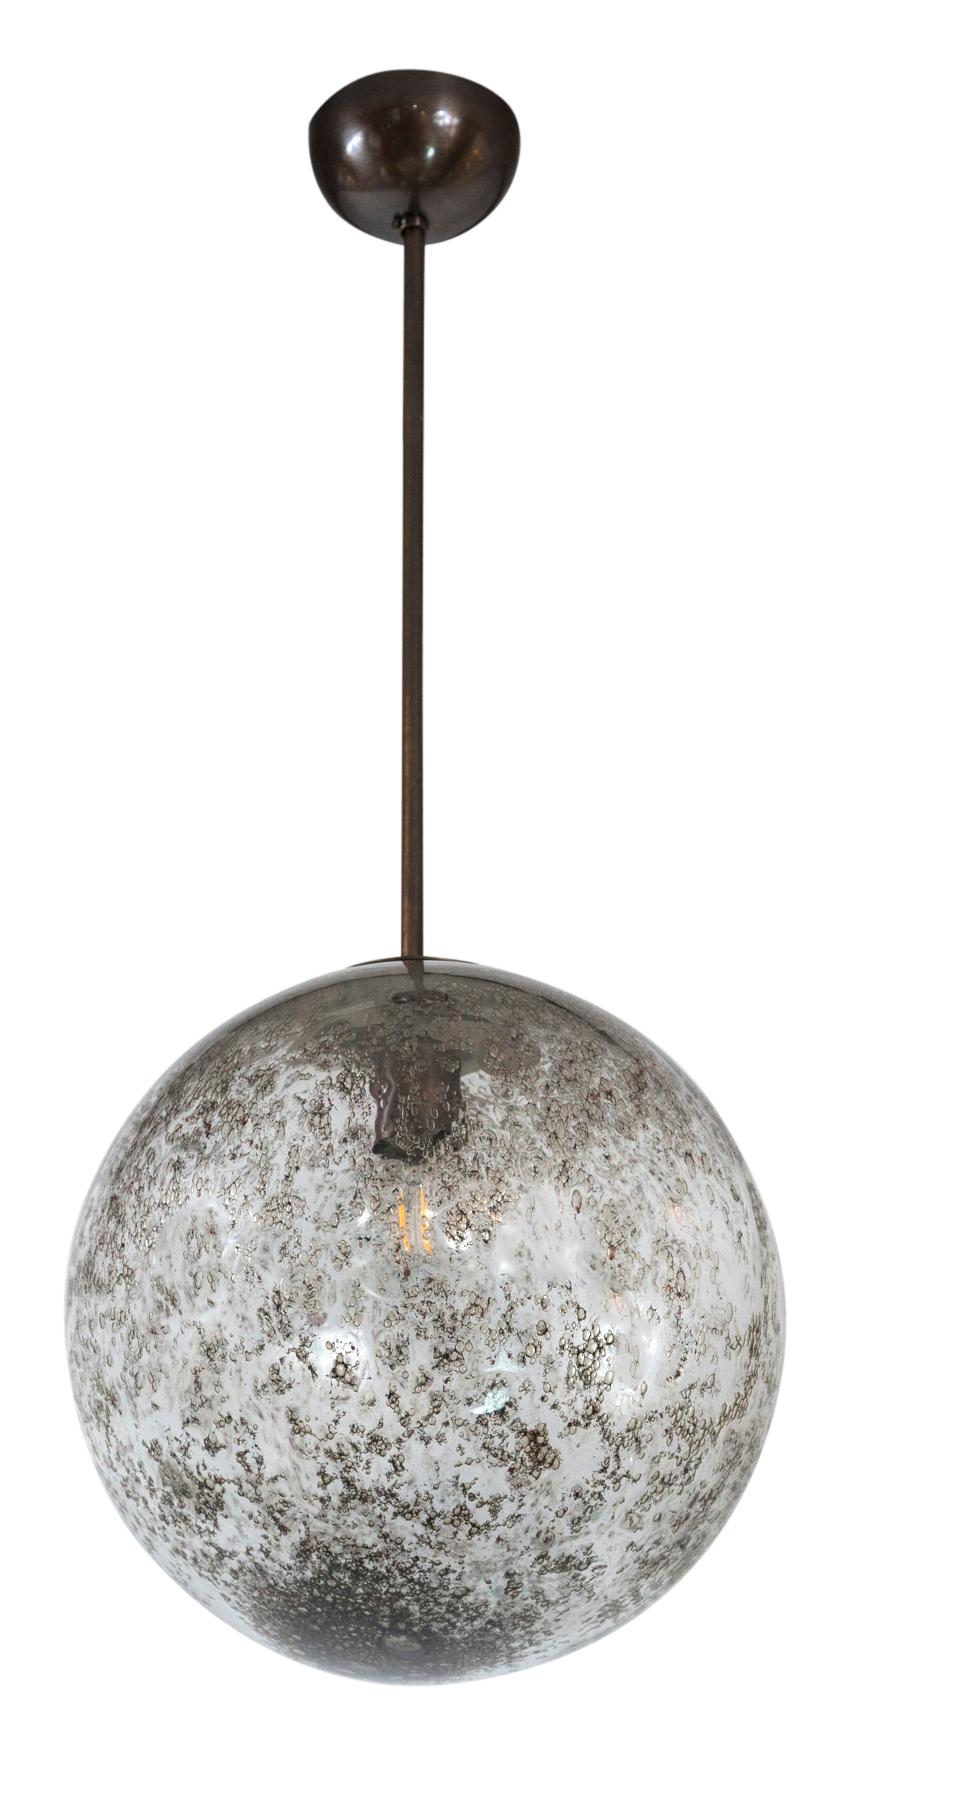 Lovely round globe lights blown with brass to create transparent dark brown mottling effect, each one unique and fabulous in a series. Fitted with dark bronze lamping, electrified for high wattage with the use of  LED bulbs and sold as electrified